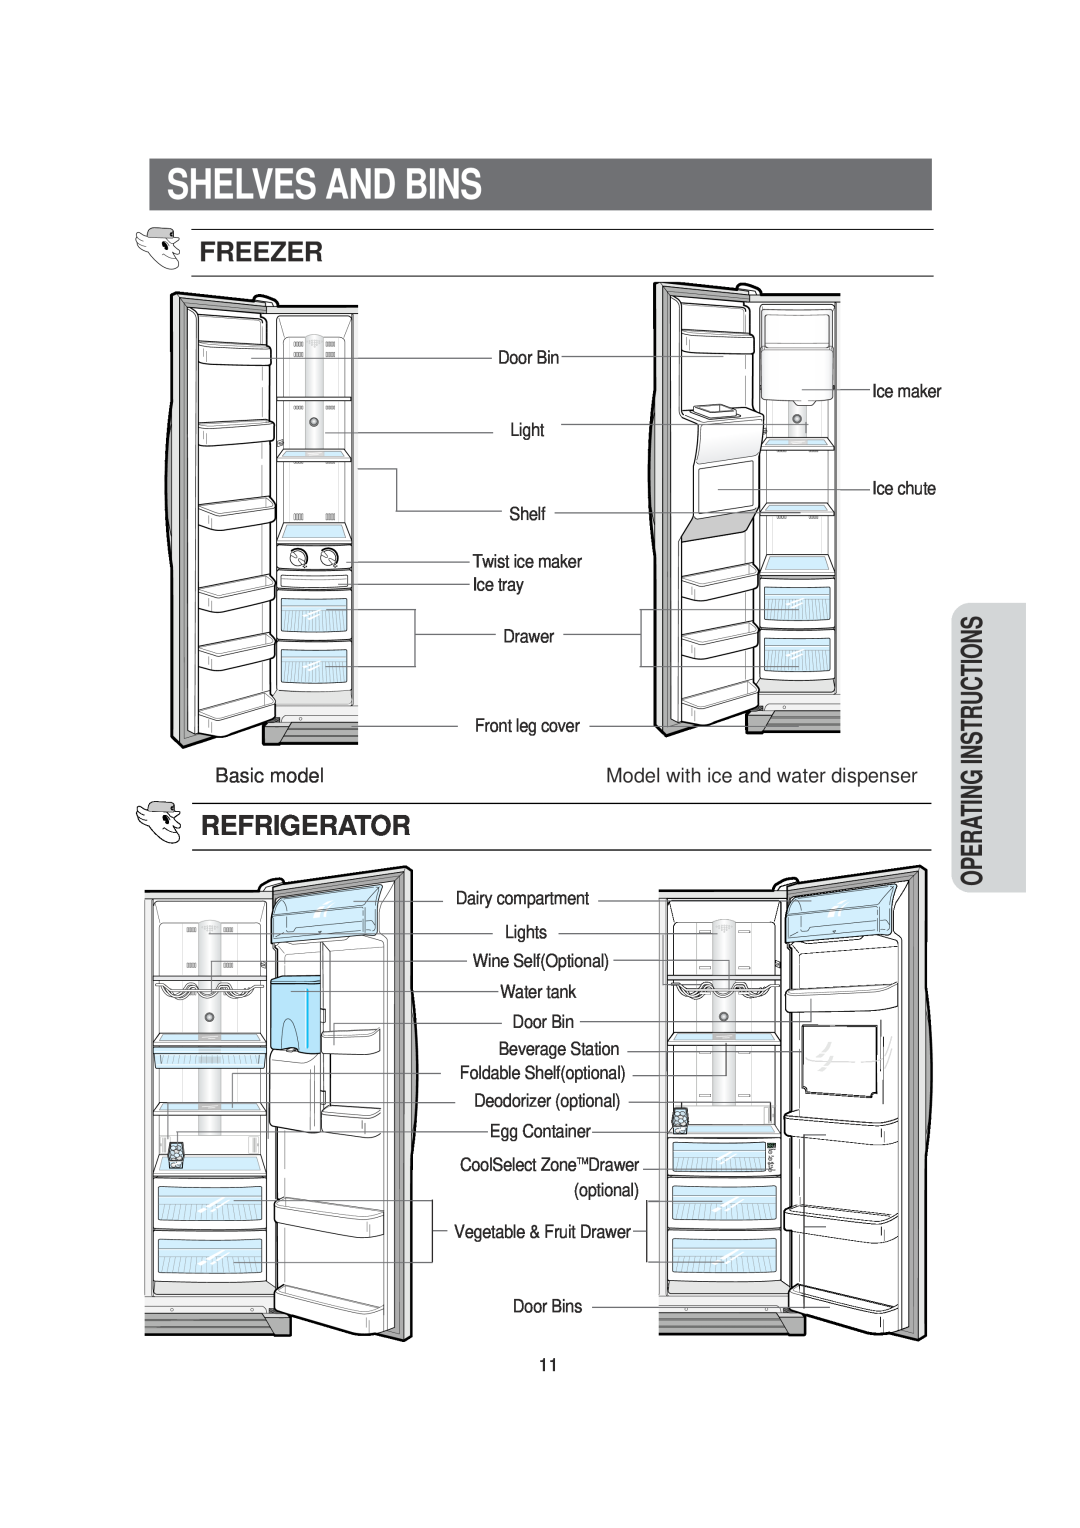 Samsung SRS620DW owner manual Shelves And Bins, Freezer, Refrigerator, Basic model, Model with ice and water dispenser 